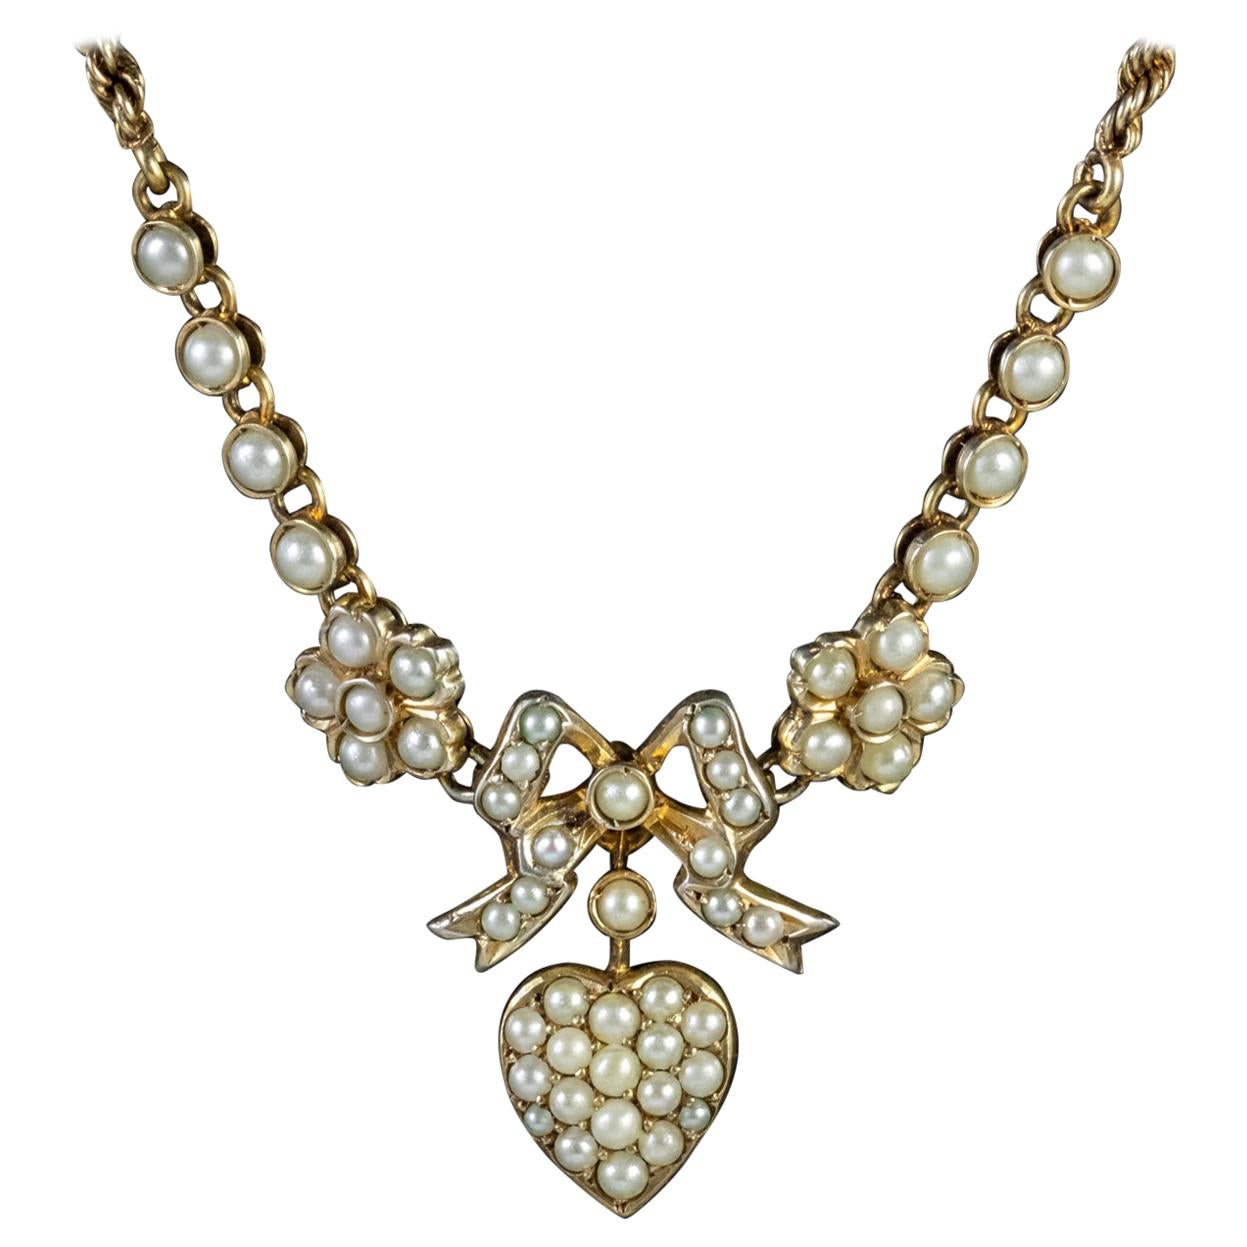 Antique Edwardian Pearl Heart Necklace Silver 15 Carat Gold, circa 1910 For Sale